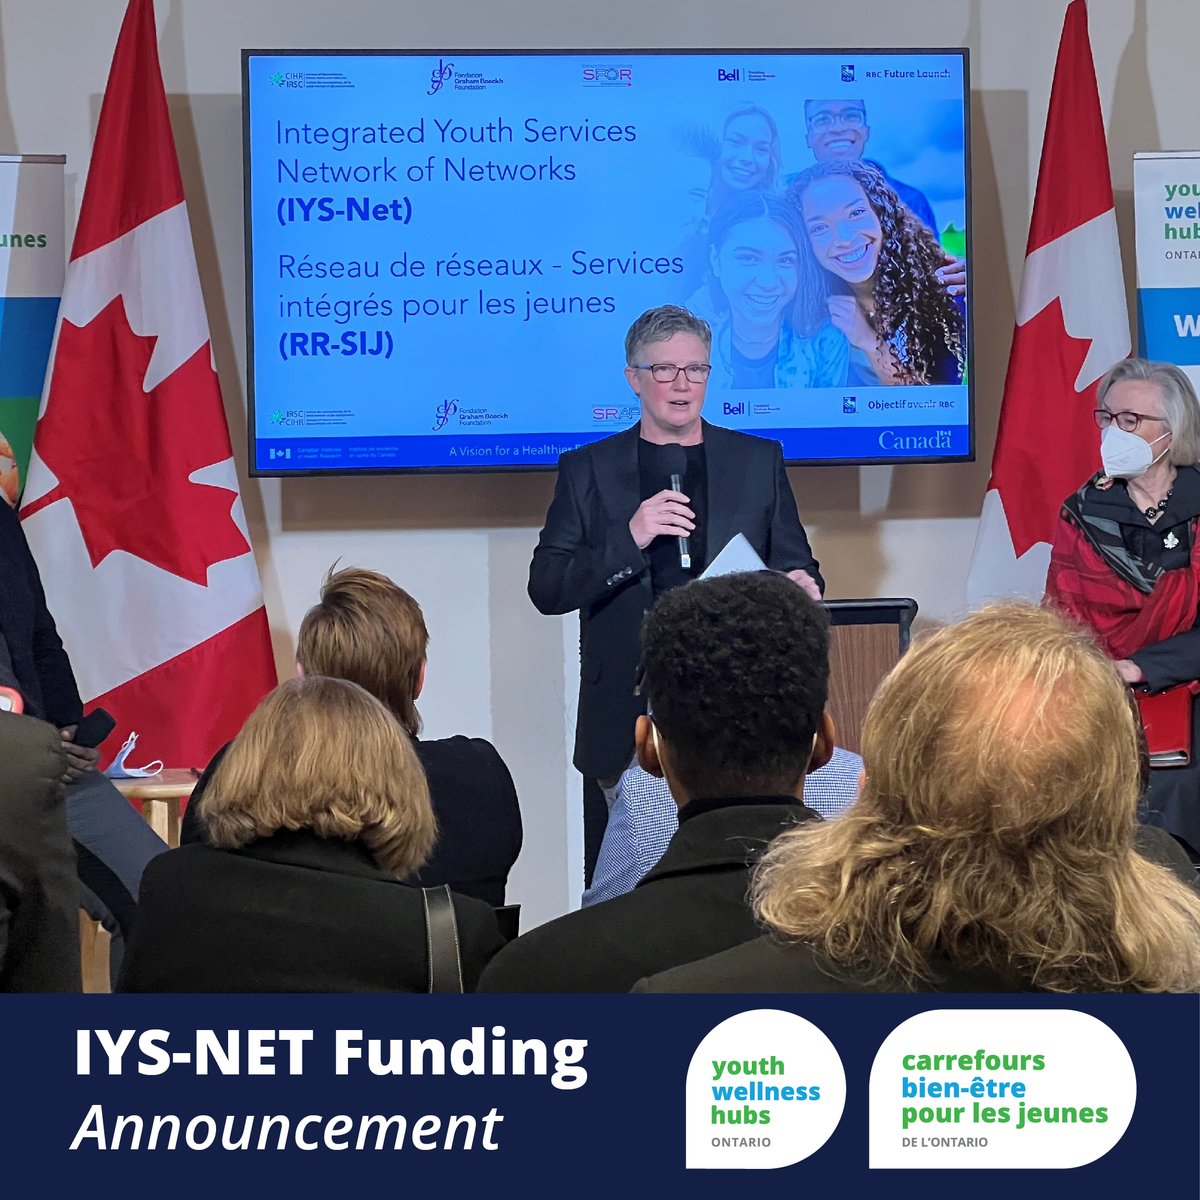 Today, Hon @CarolynBennett announced funding to support Integrated Youth Services (IYS) and 1) establish a pan-Canadian IYS Network of Networks, + 2) develop the IYS Data Framework and Infrastructure. Watch: facebook.com/ywhontario/vid… @CIHR_IRSC @MichaelTibollo @CAMHnews